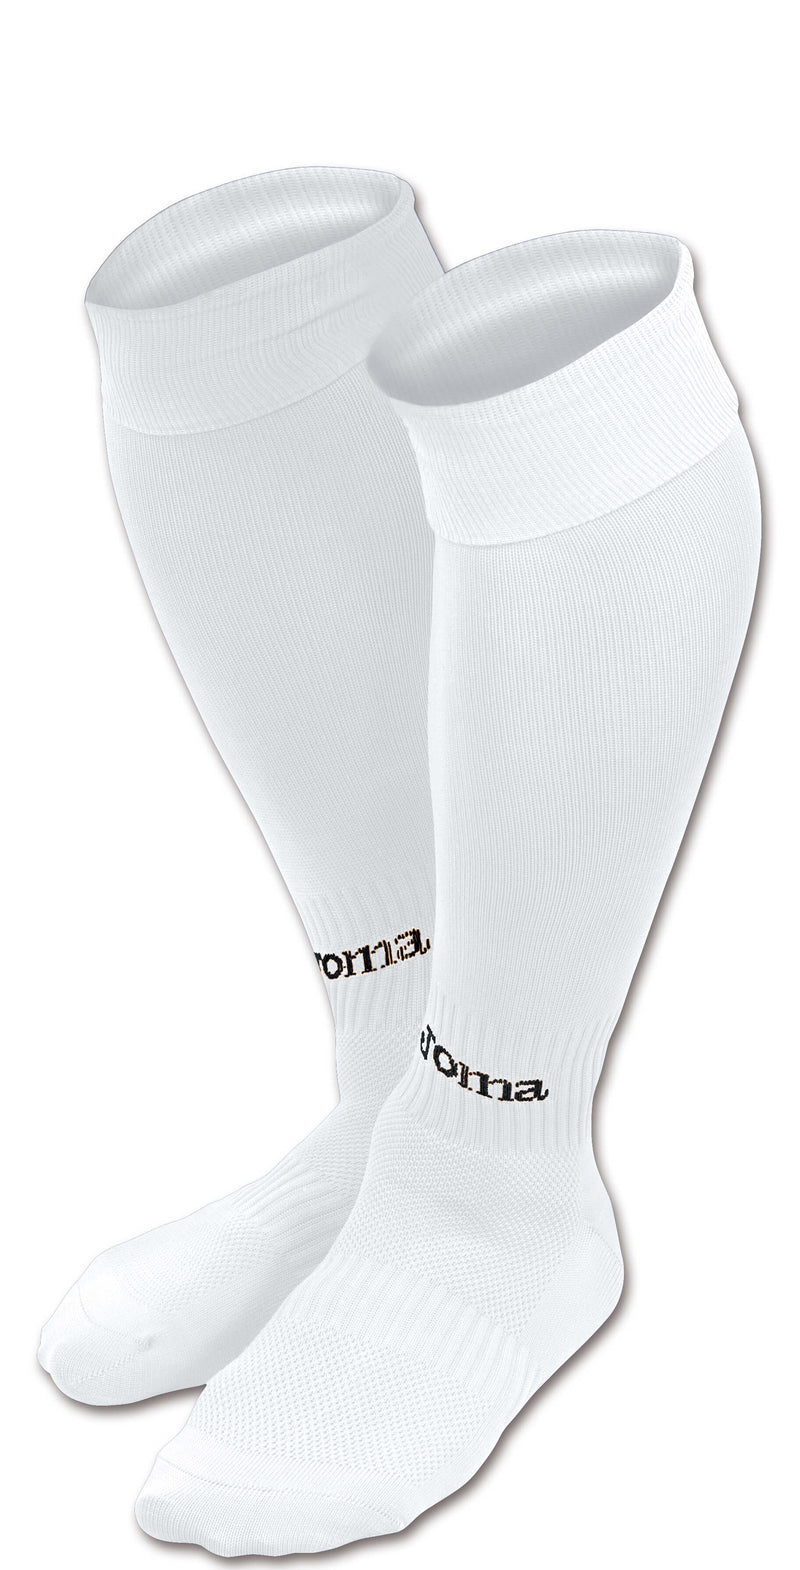 verdict Embed somewhat Joma Classic II Soccer Socks (4 pack) – Soccer Command